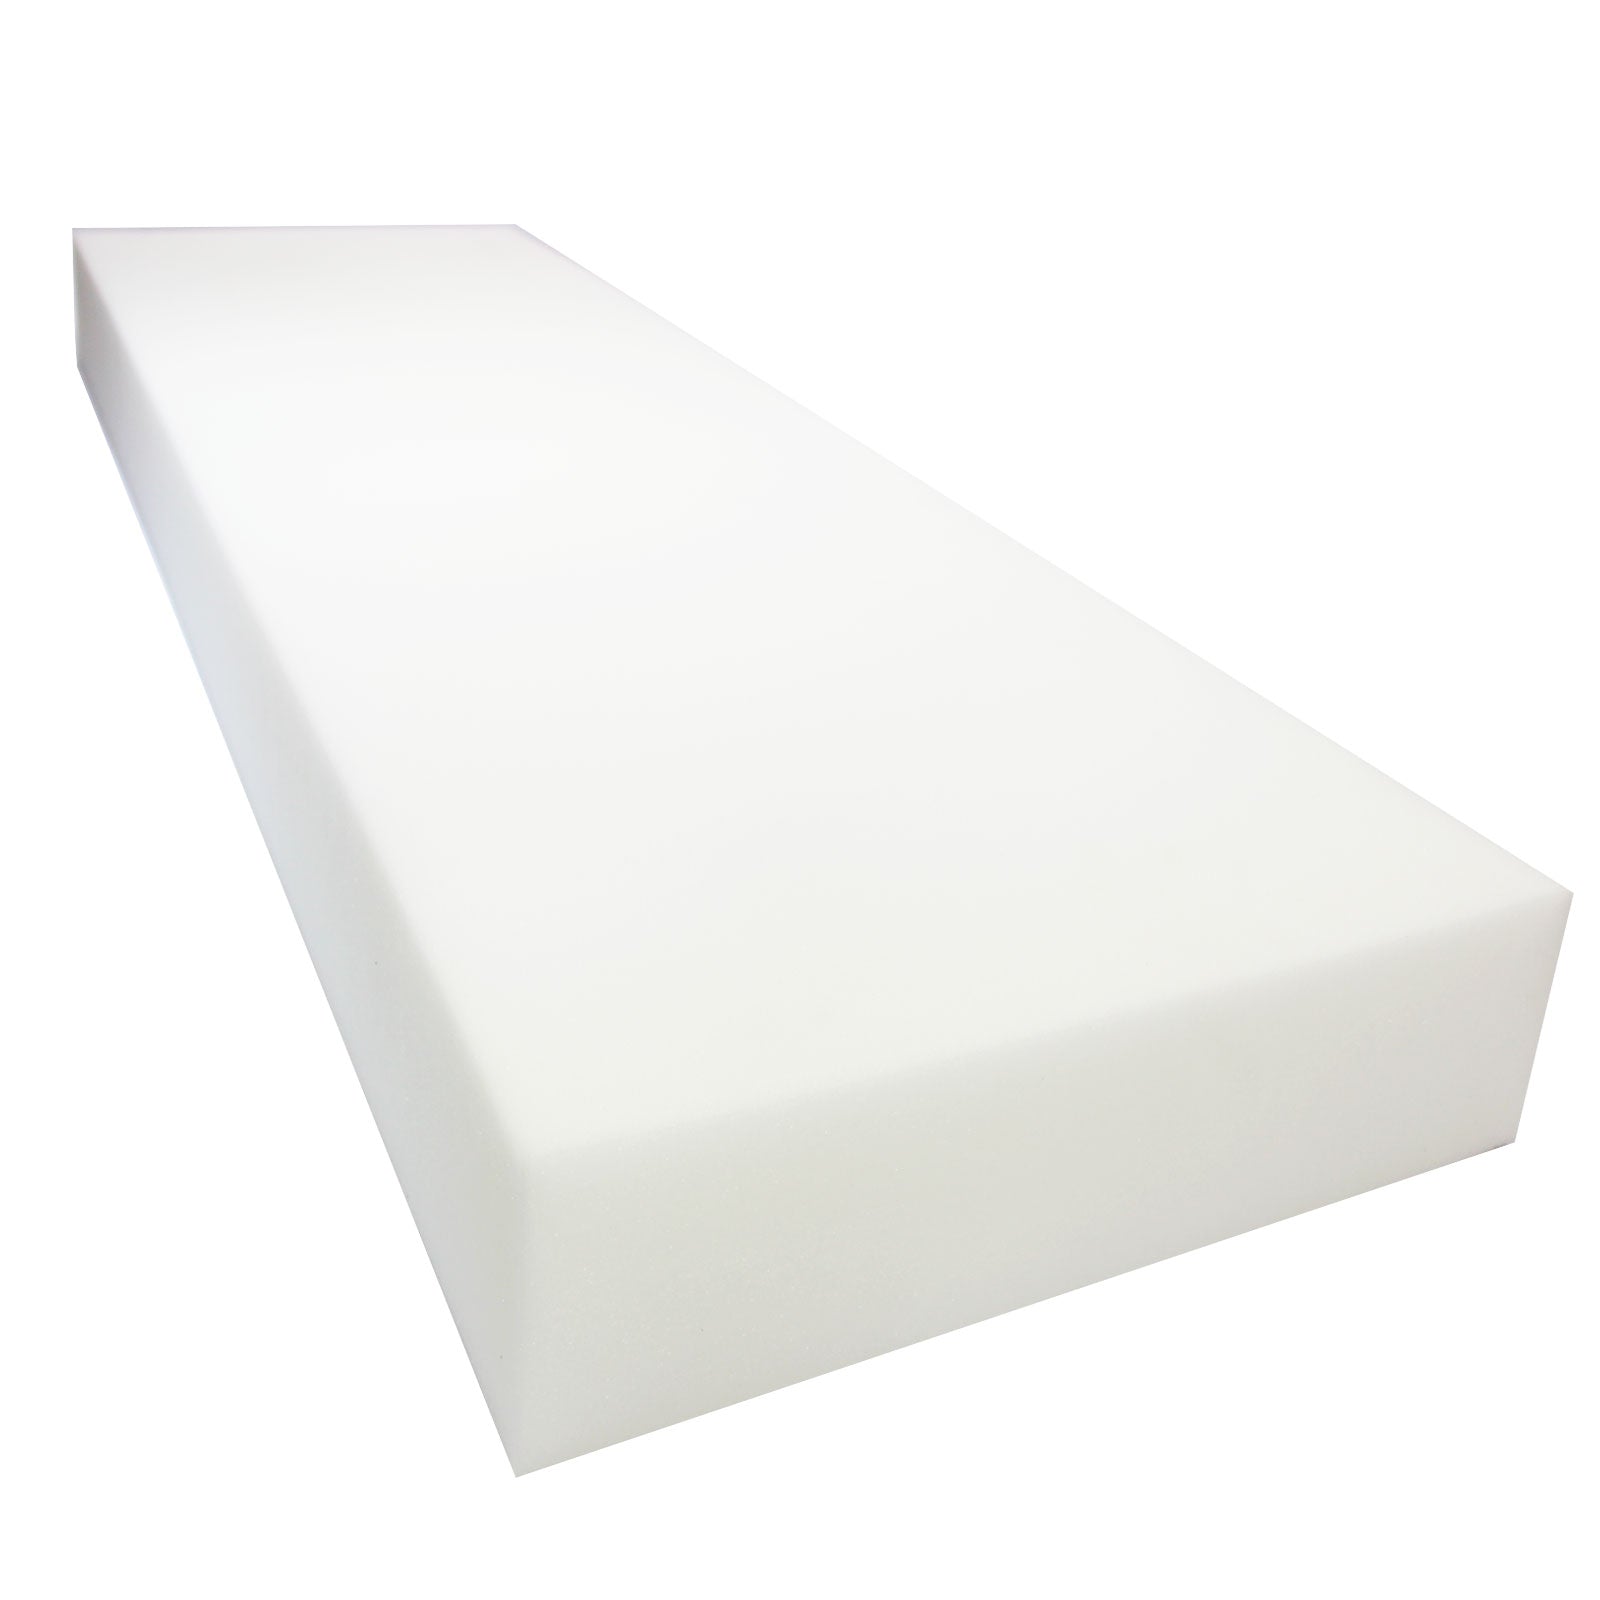 Foamy Foam High Density 6 inch Thick, 18 inch Wide, 18 inch Long Upholstery Foam, Cushion Replacement